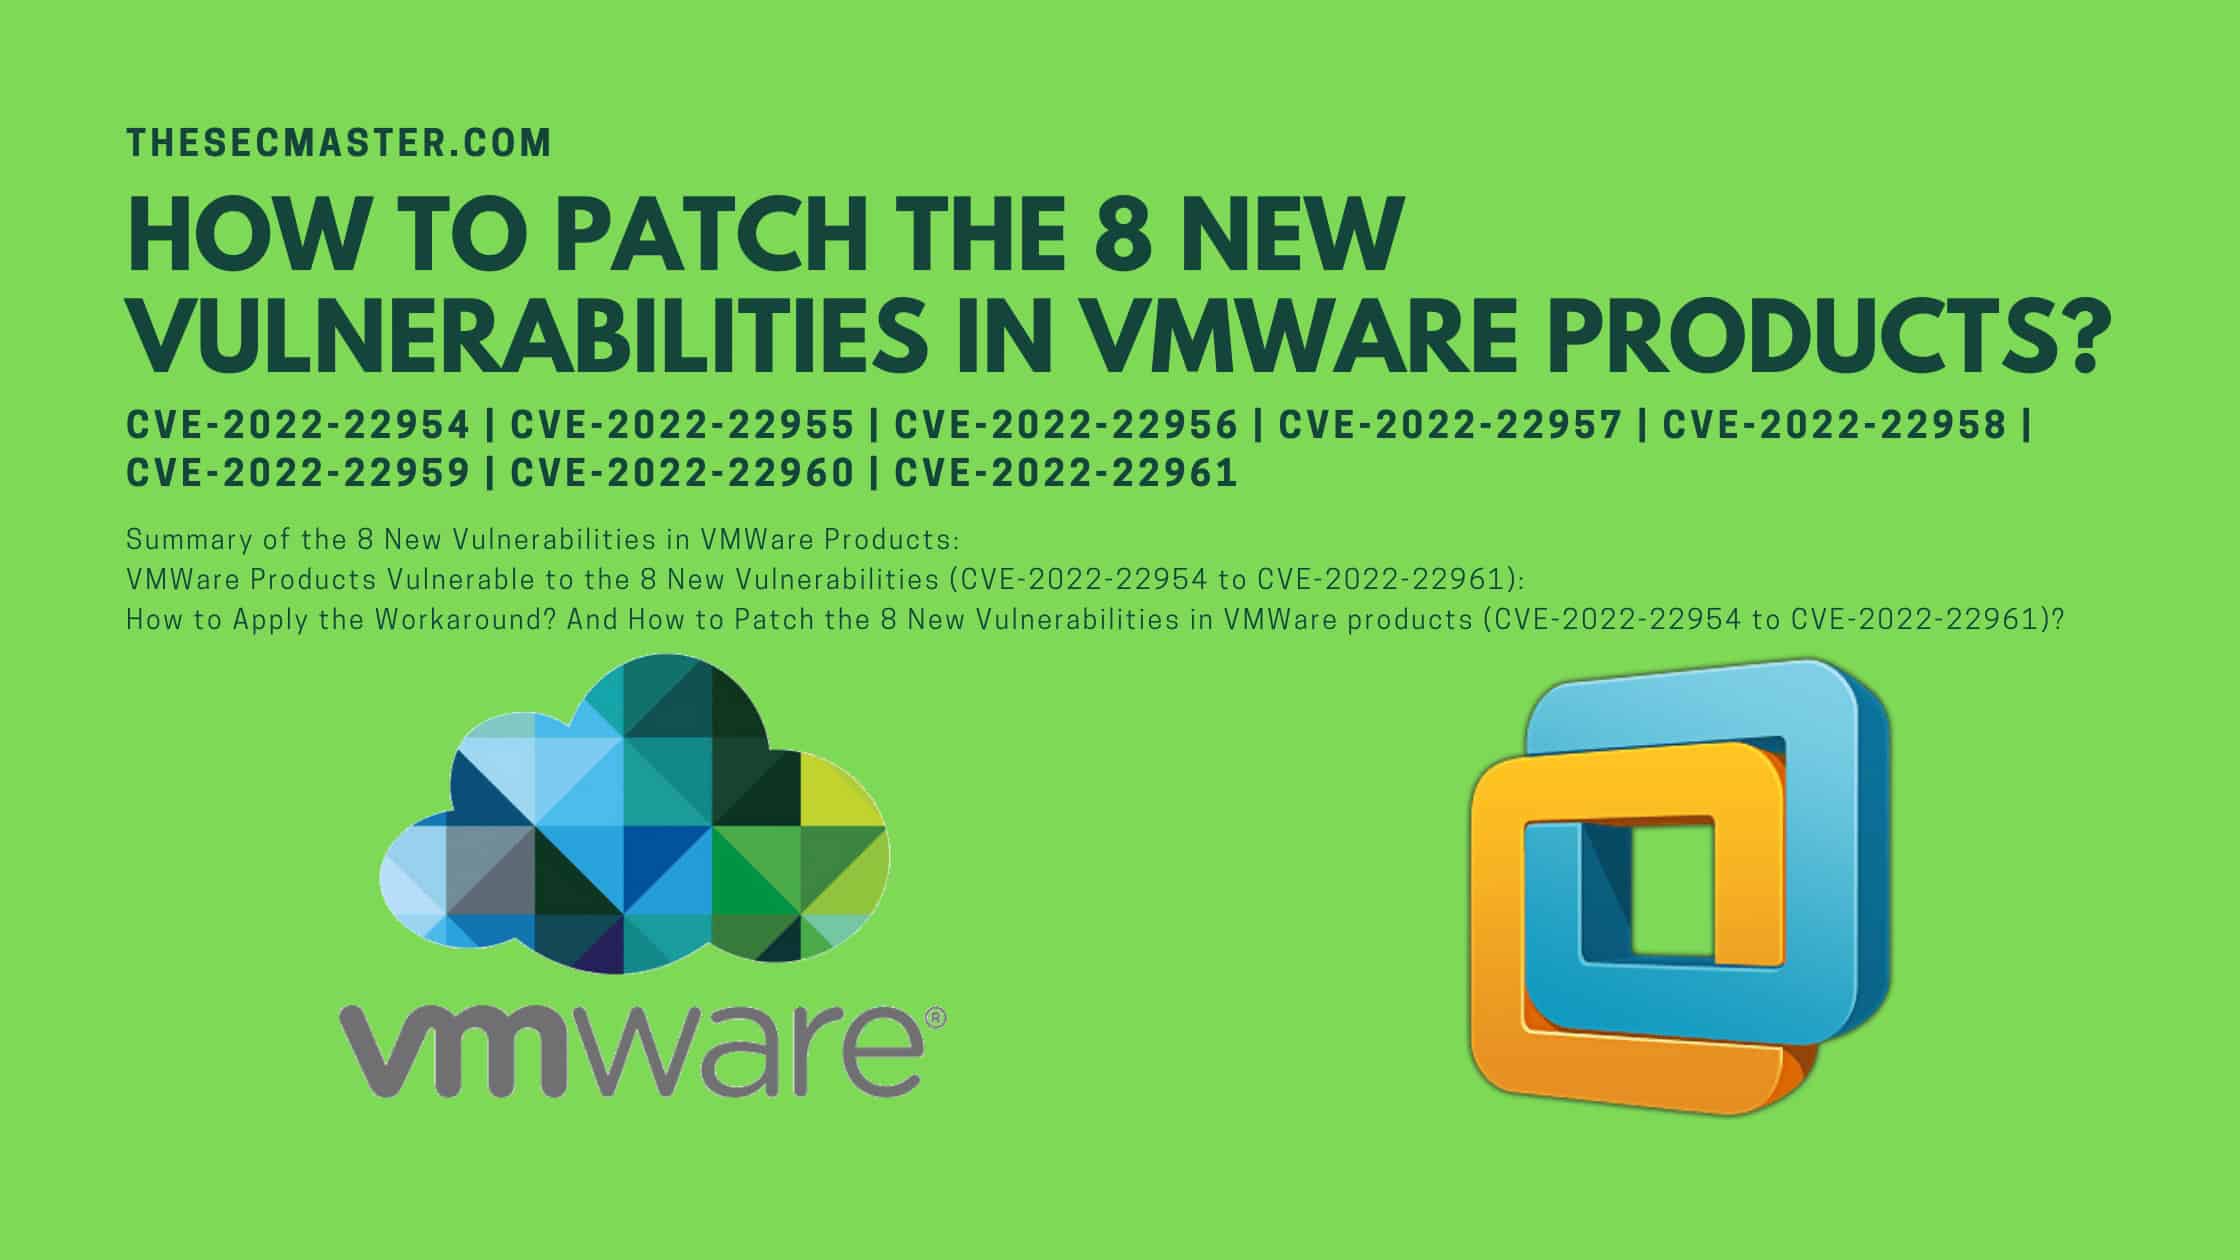 How To Patch The 8 New Vulnerabilities In Vmware Products Cve 2022 22954 To Cve 2022 22961